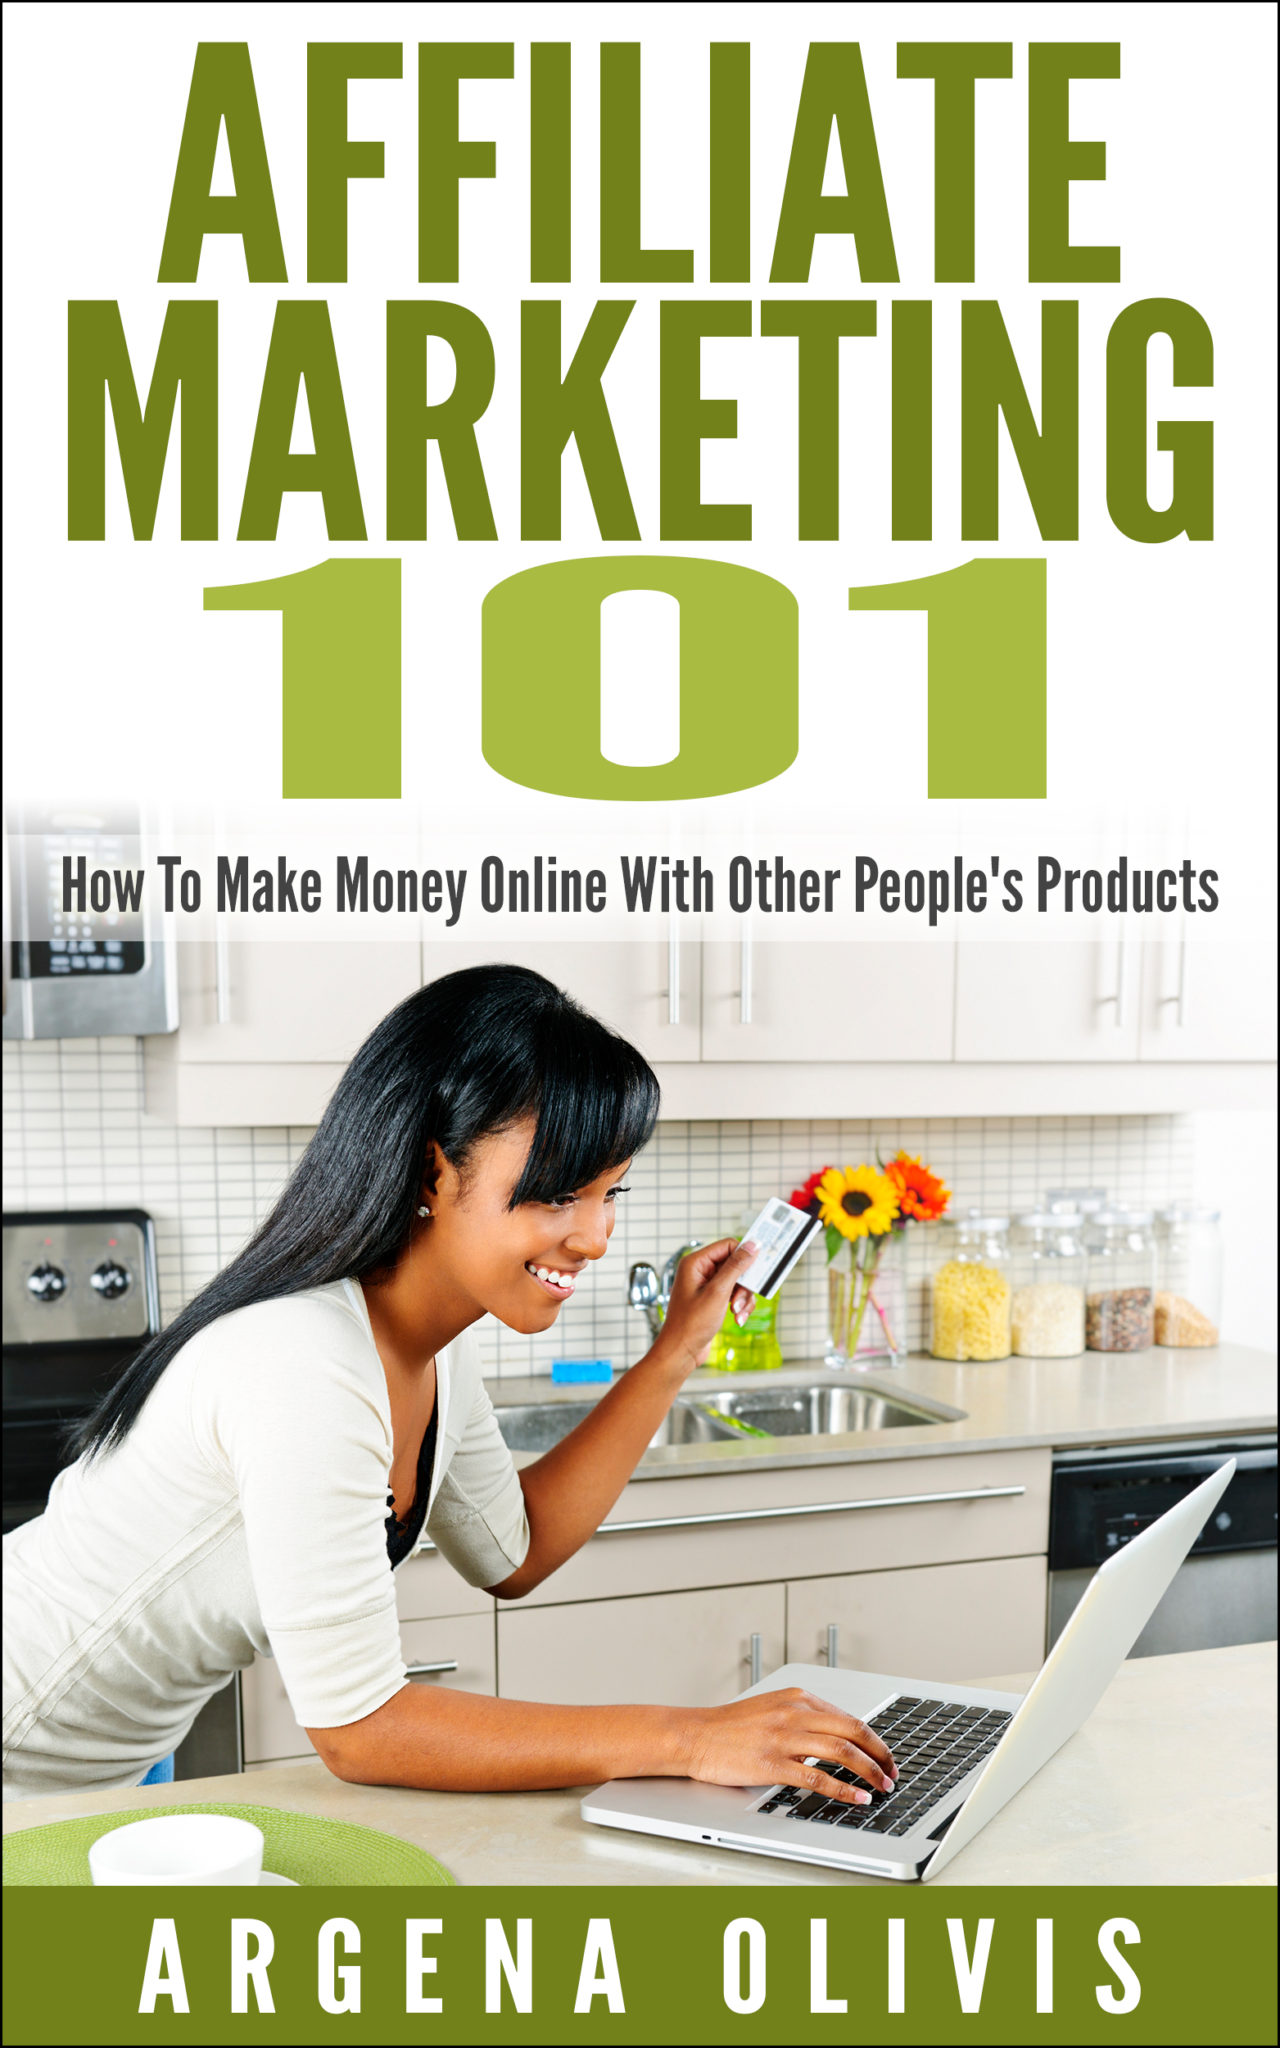 Affiliate Marketing 101: How To Make Money Online With Other People’s Products by Argena Olivis